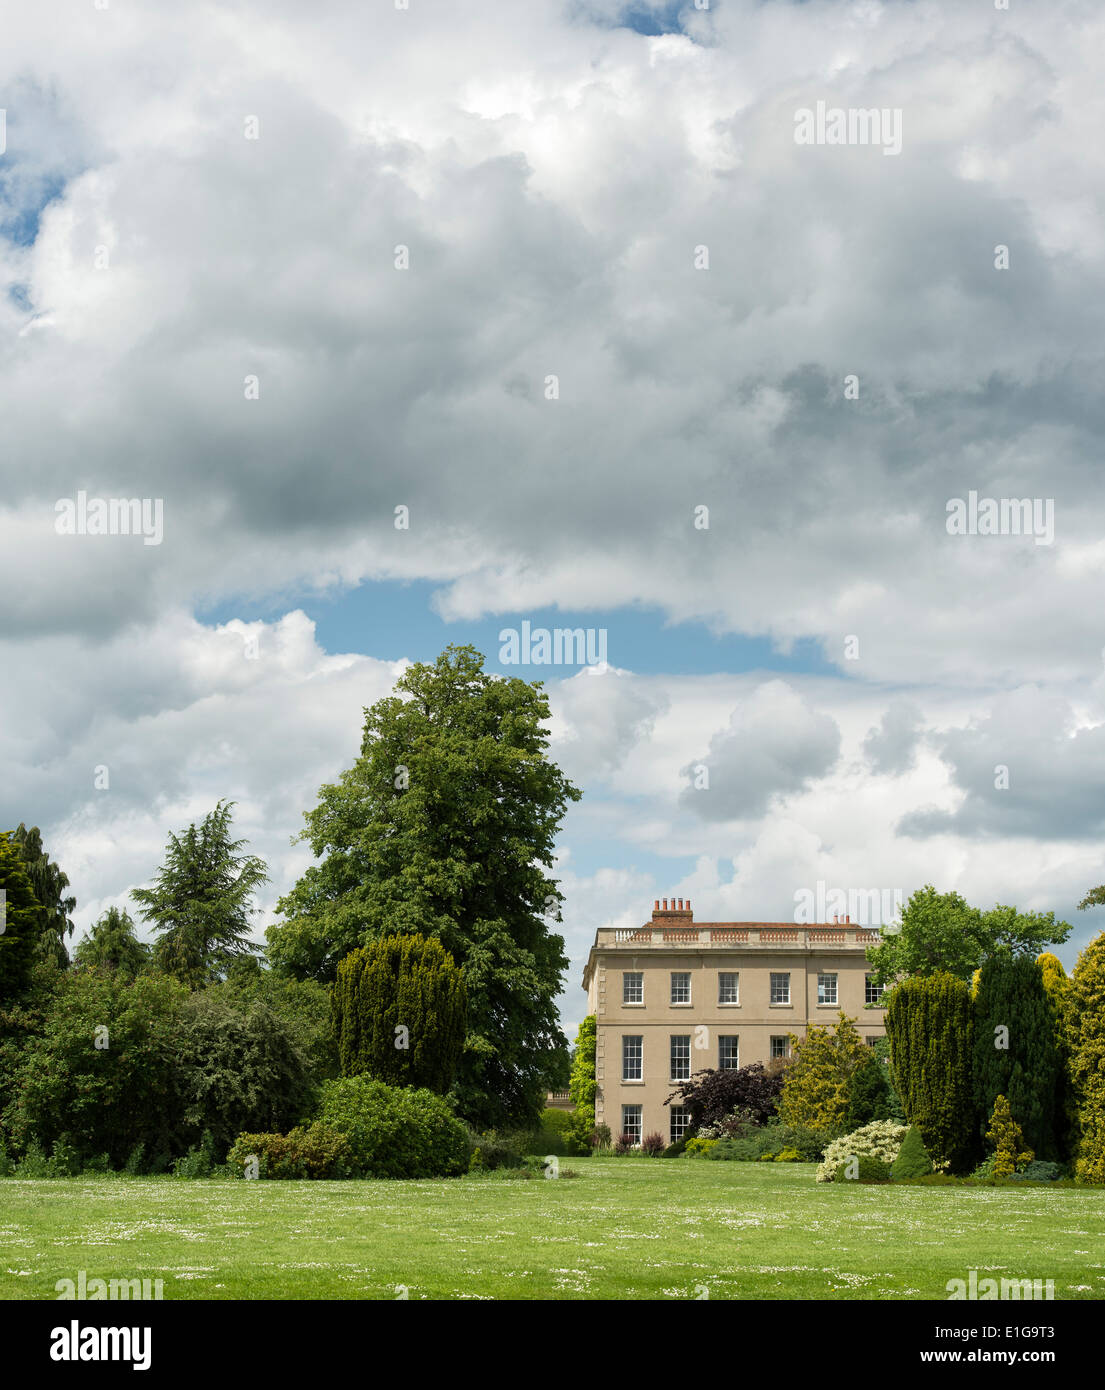 Waterperry house and gardens, Wheatley, Oxfordshire. England Stock Photo